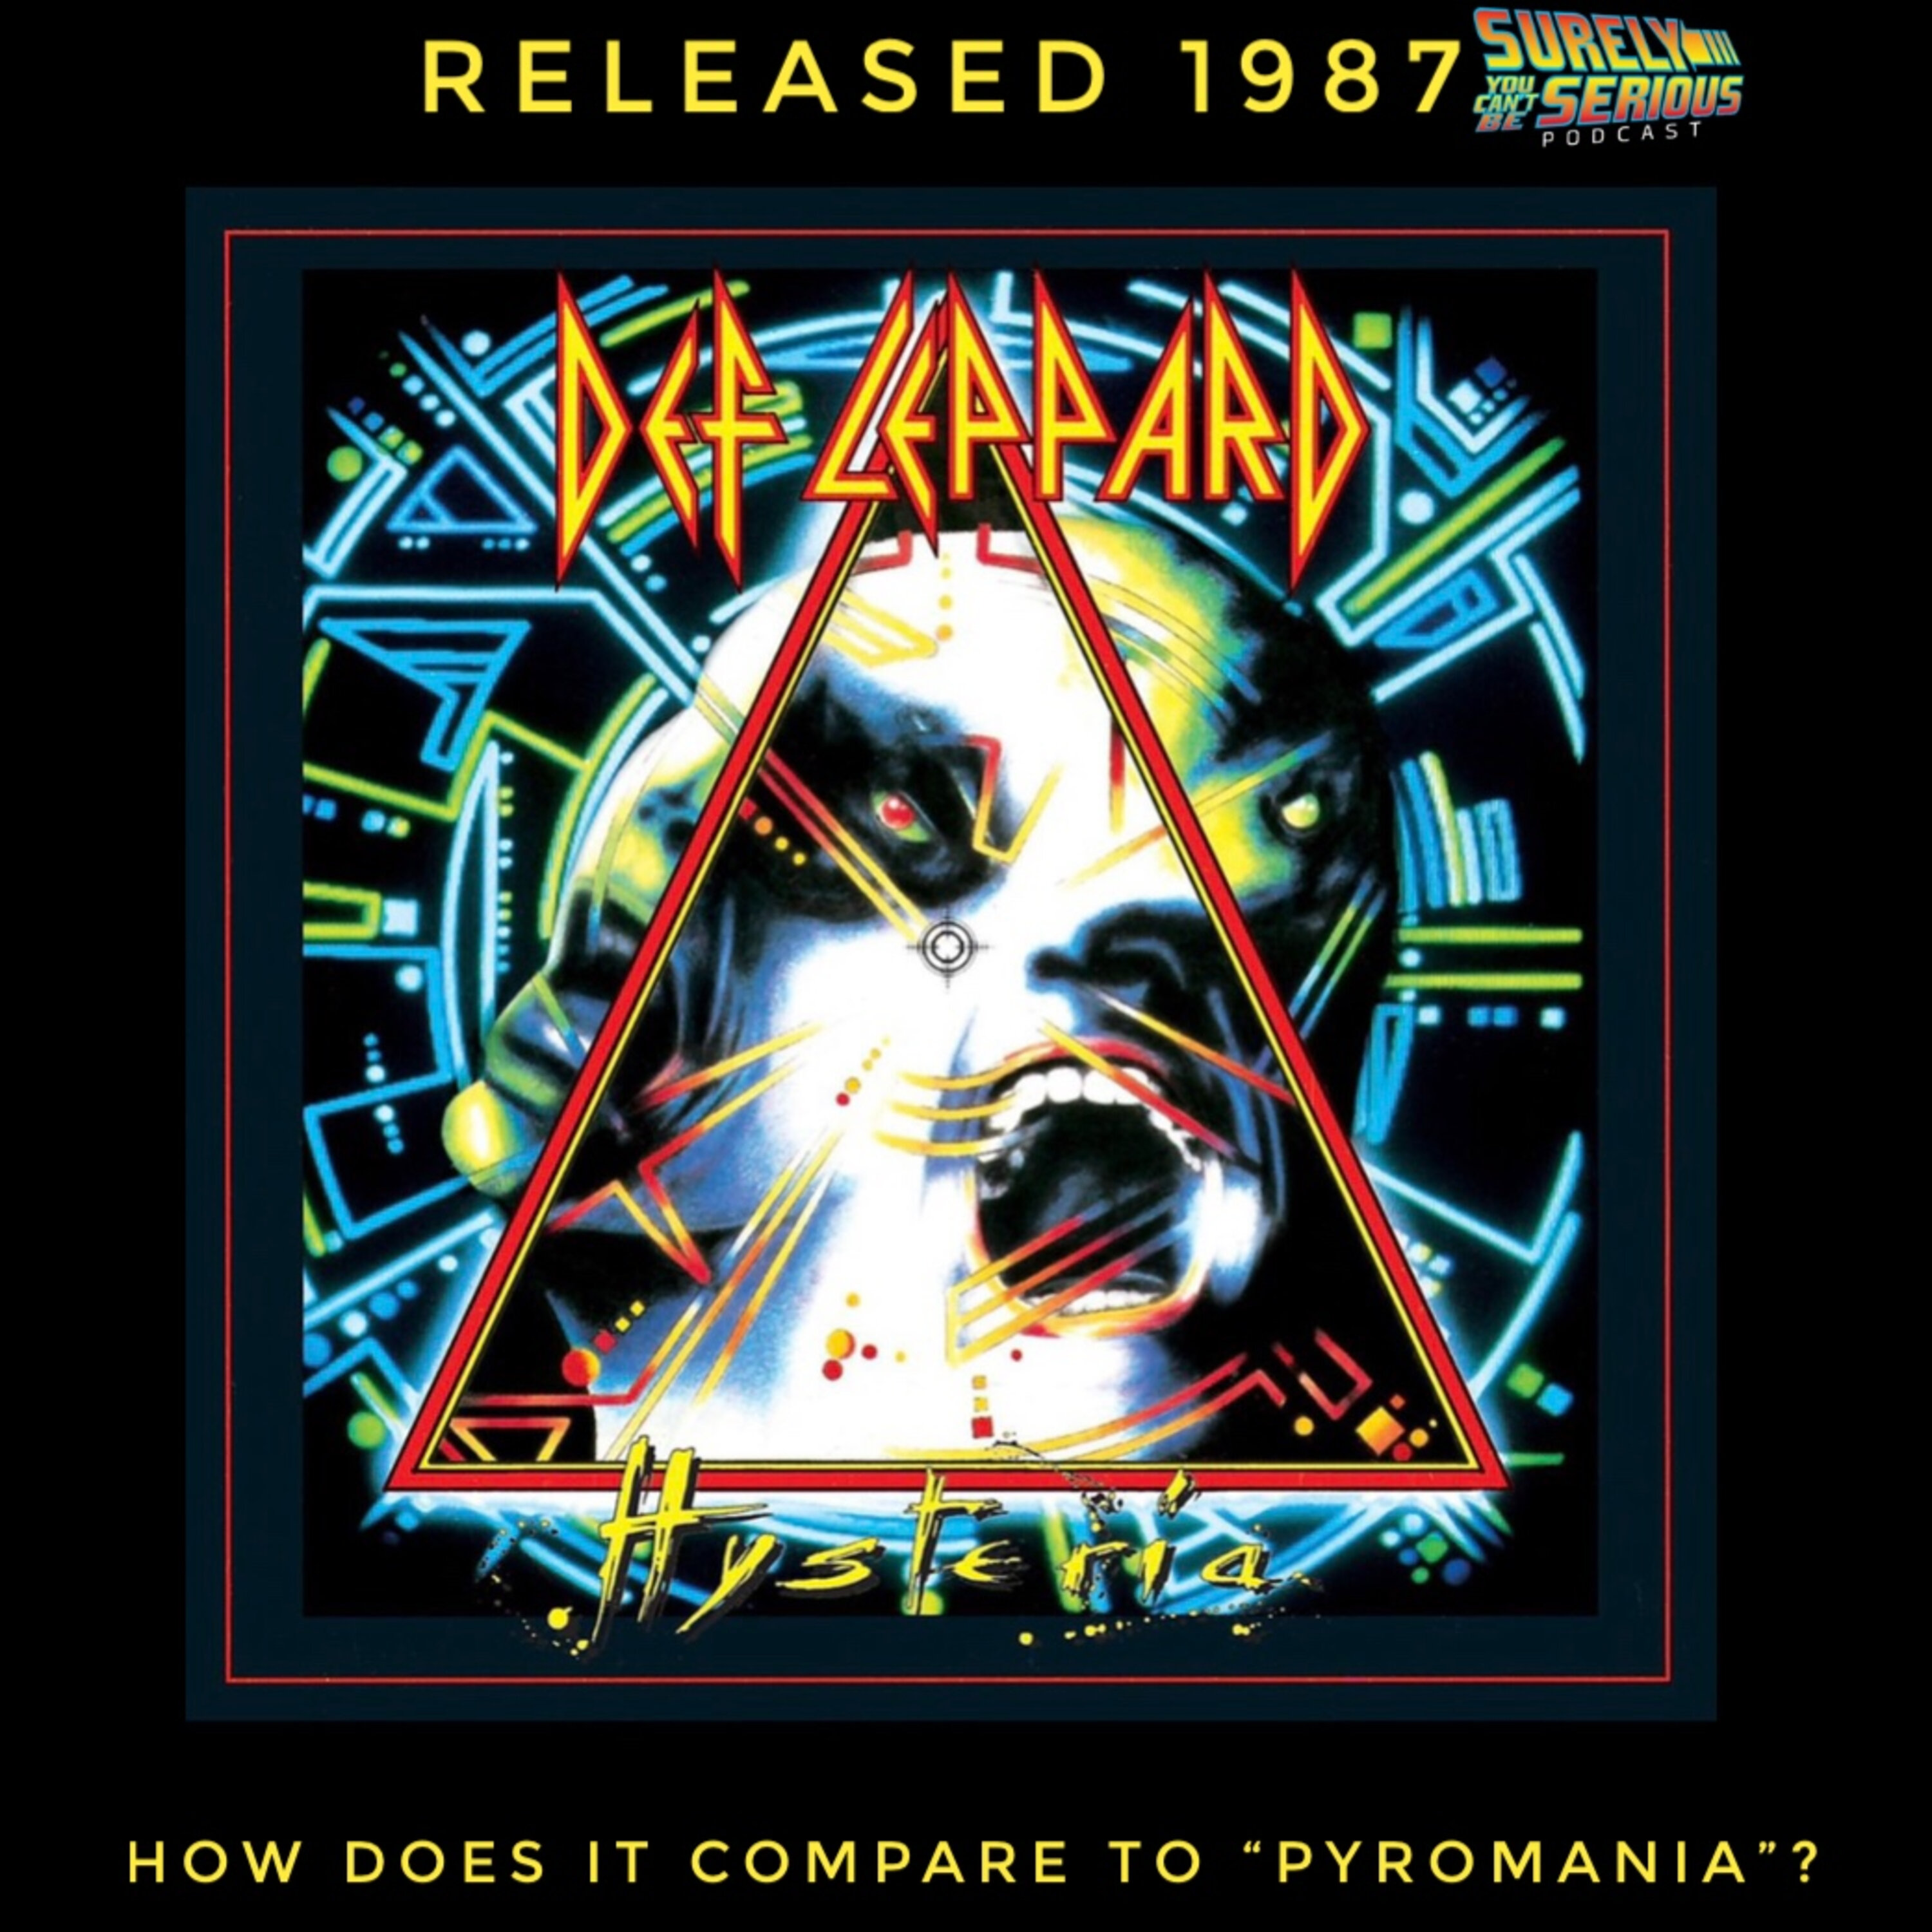 Def Leppard's "Hysteria" (1987) Image